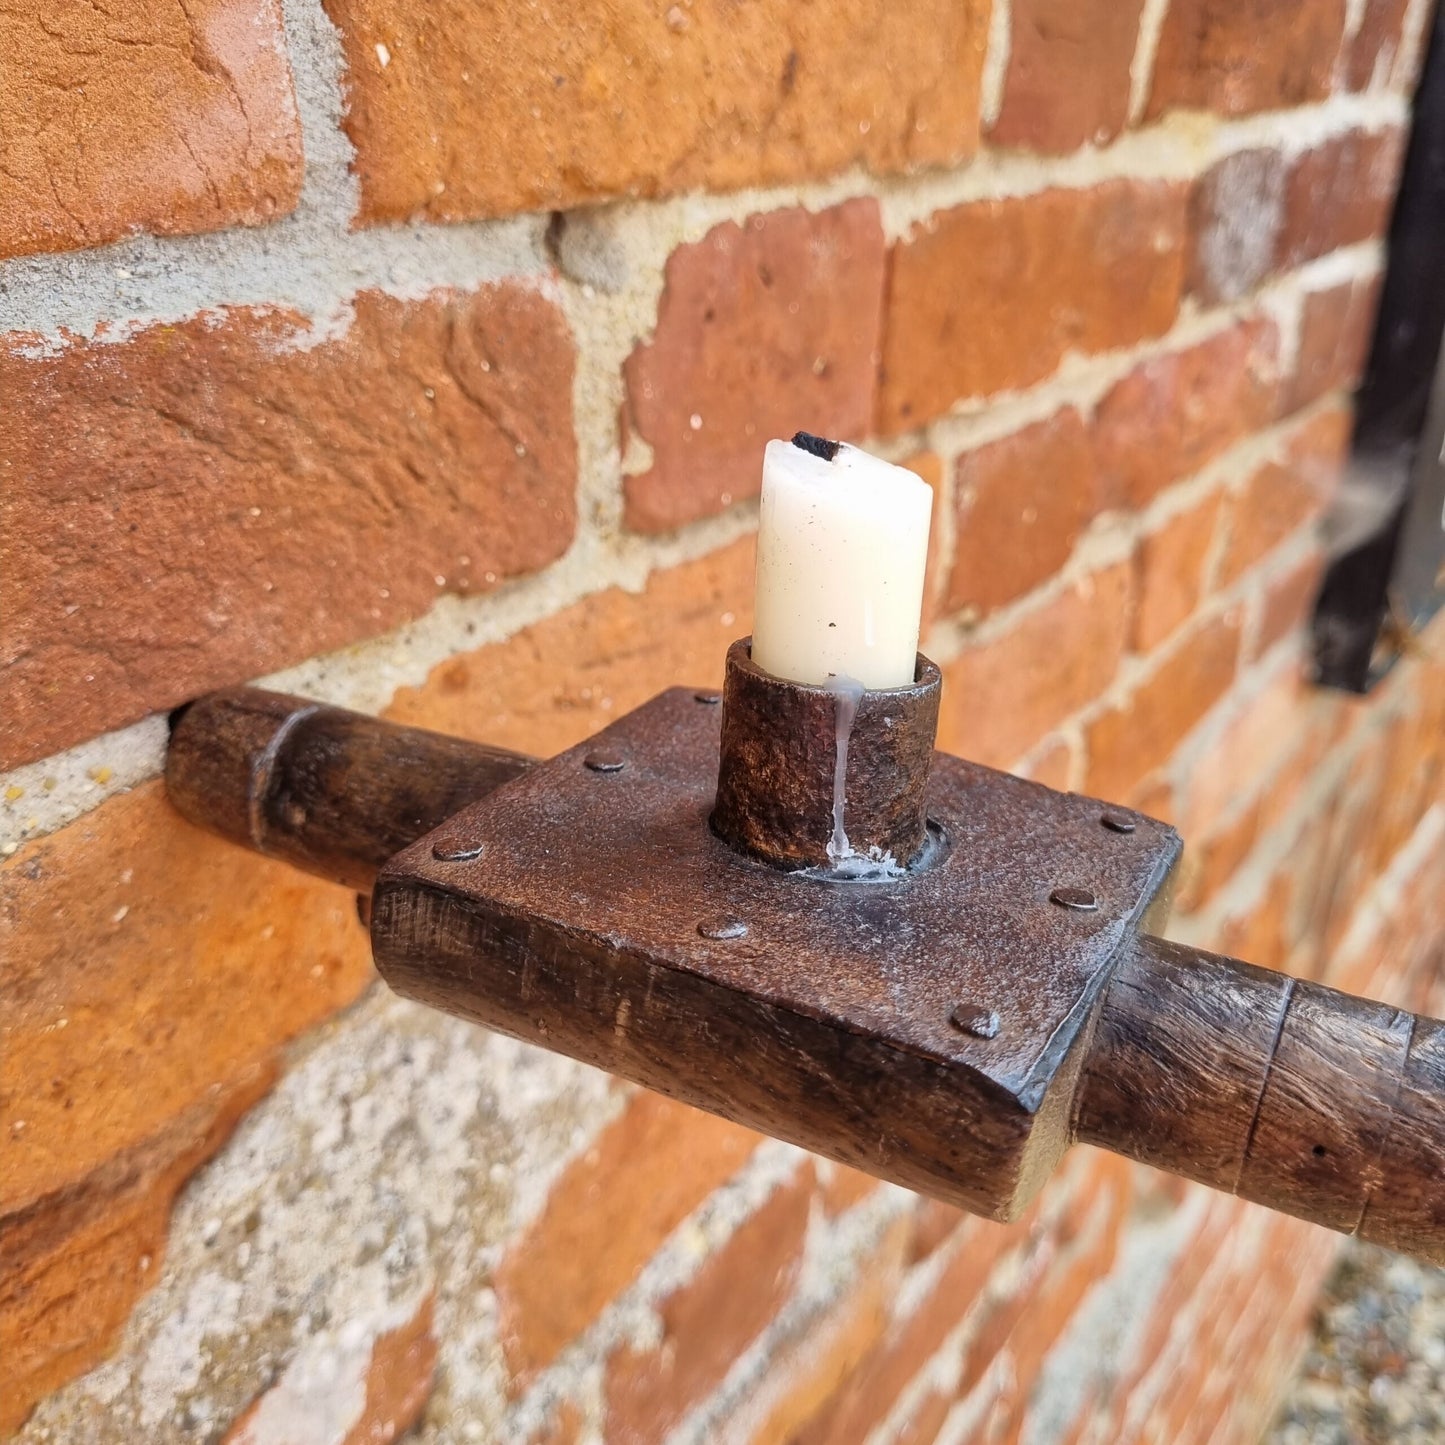 Rare Late 18th Century English Antique Treen and Iron "Sticking Tommy" or "Go-to-bed" Candlestick With Iron Wall Spike